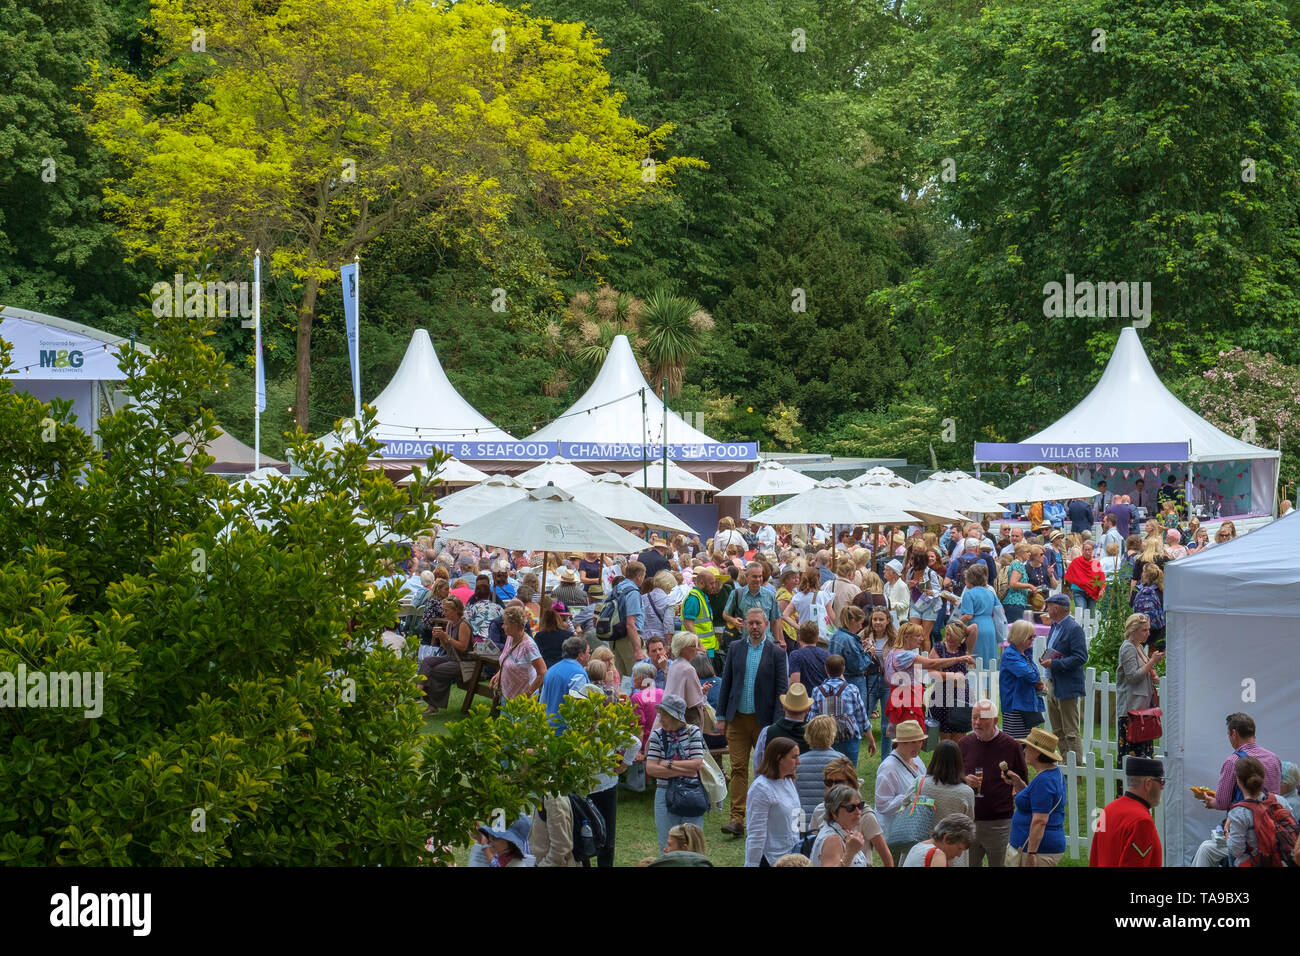 London, UK - May 22nd 2019: RHS Chelsea Flower Show, the tented village where the crowds of visitors enjoy food and drink. Stock Photo